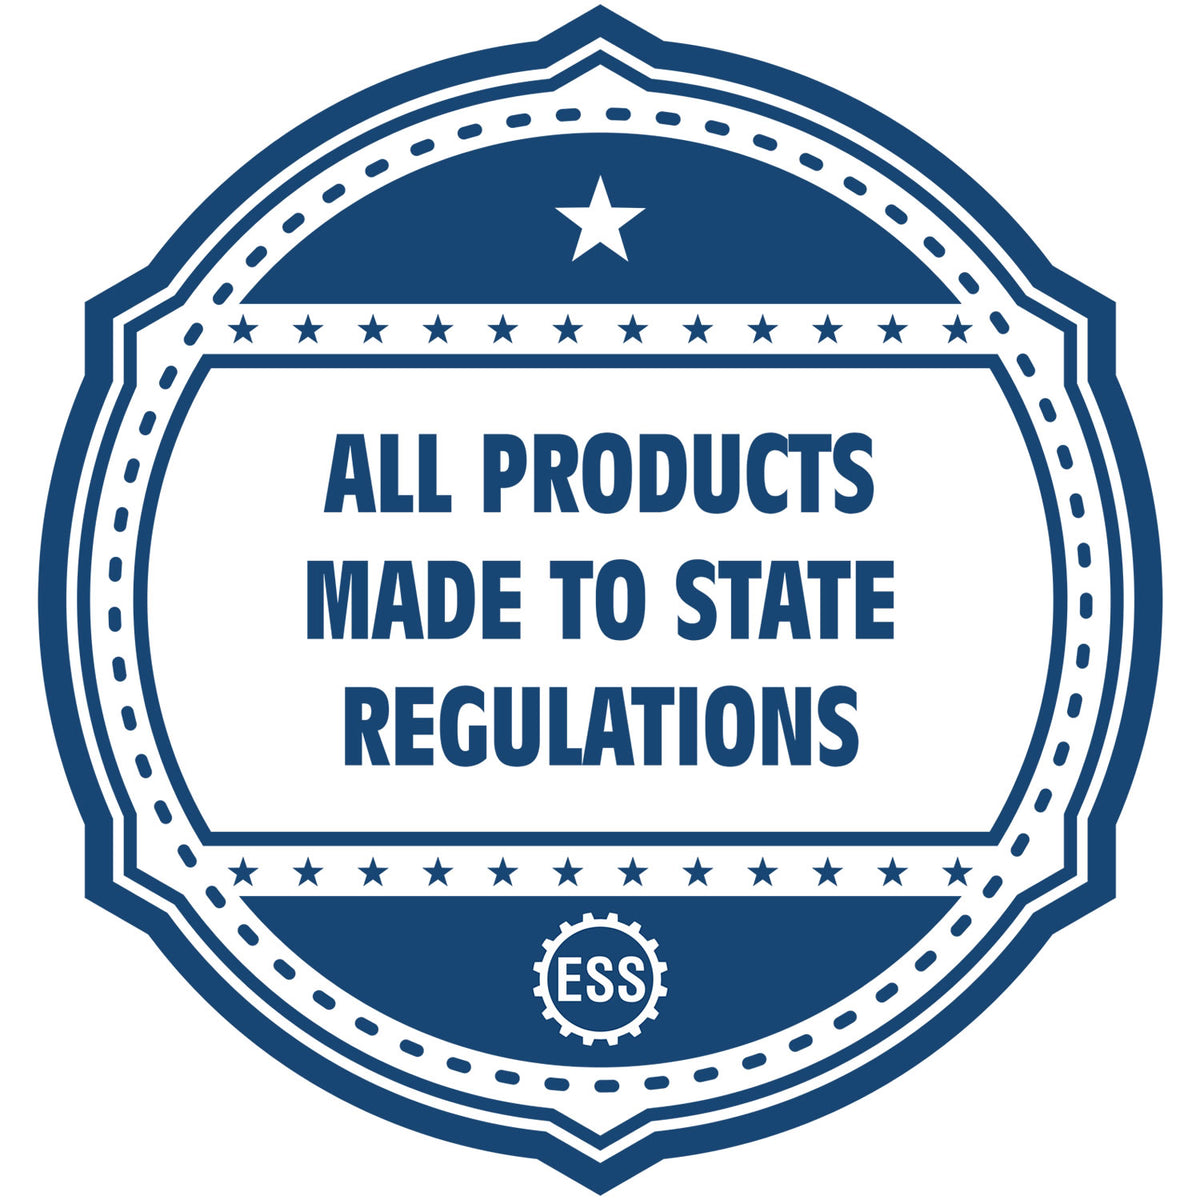 An icon or badge element for the Slim Pre-Inked Rhode Island Landscape Architect Seal Stamp showing that this product is made in compliance with state regulations.